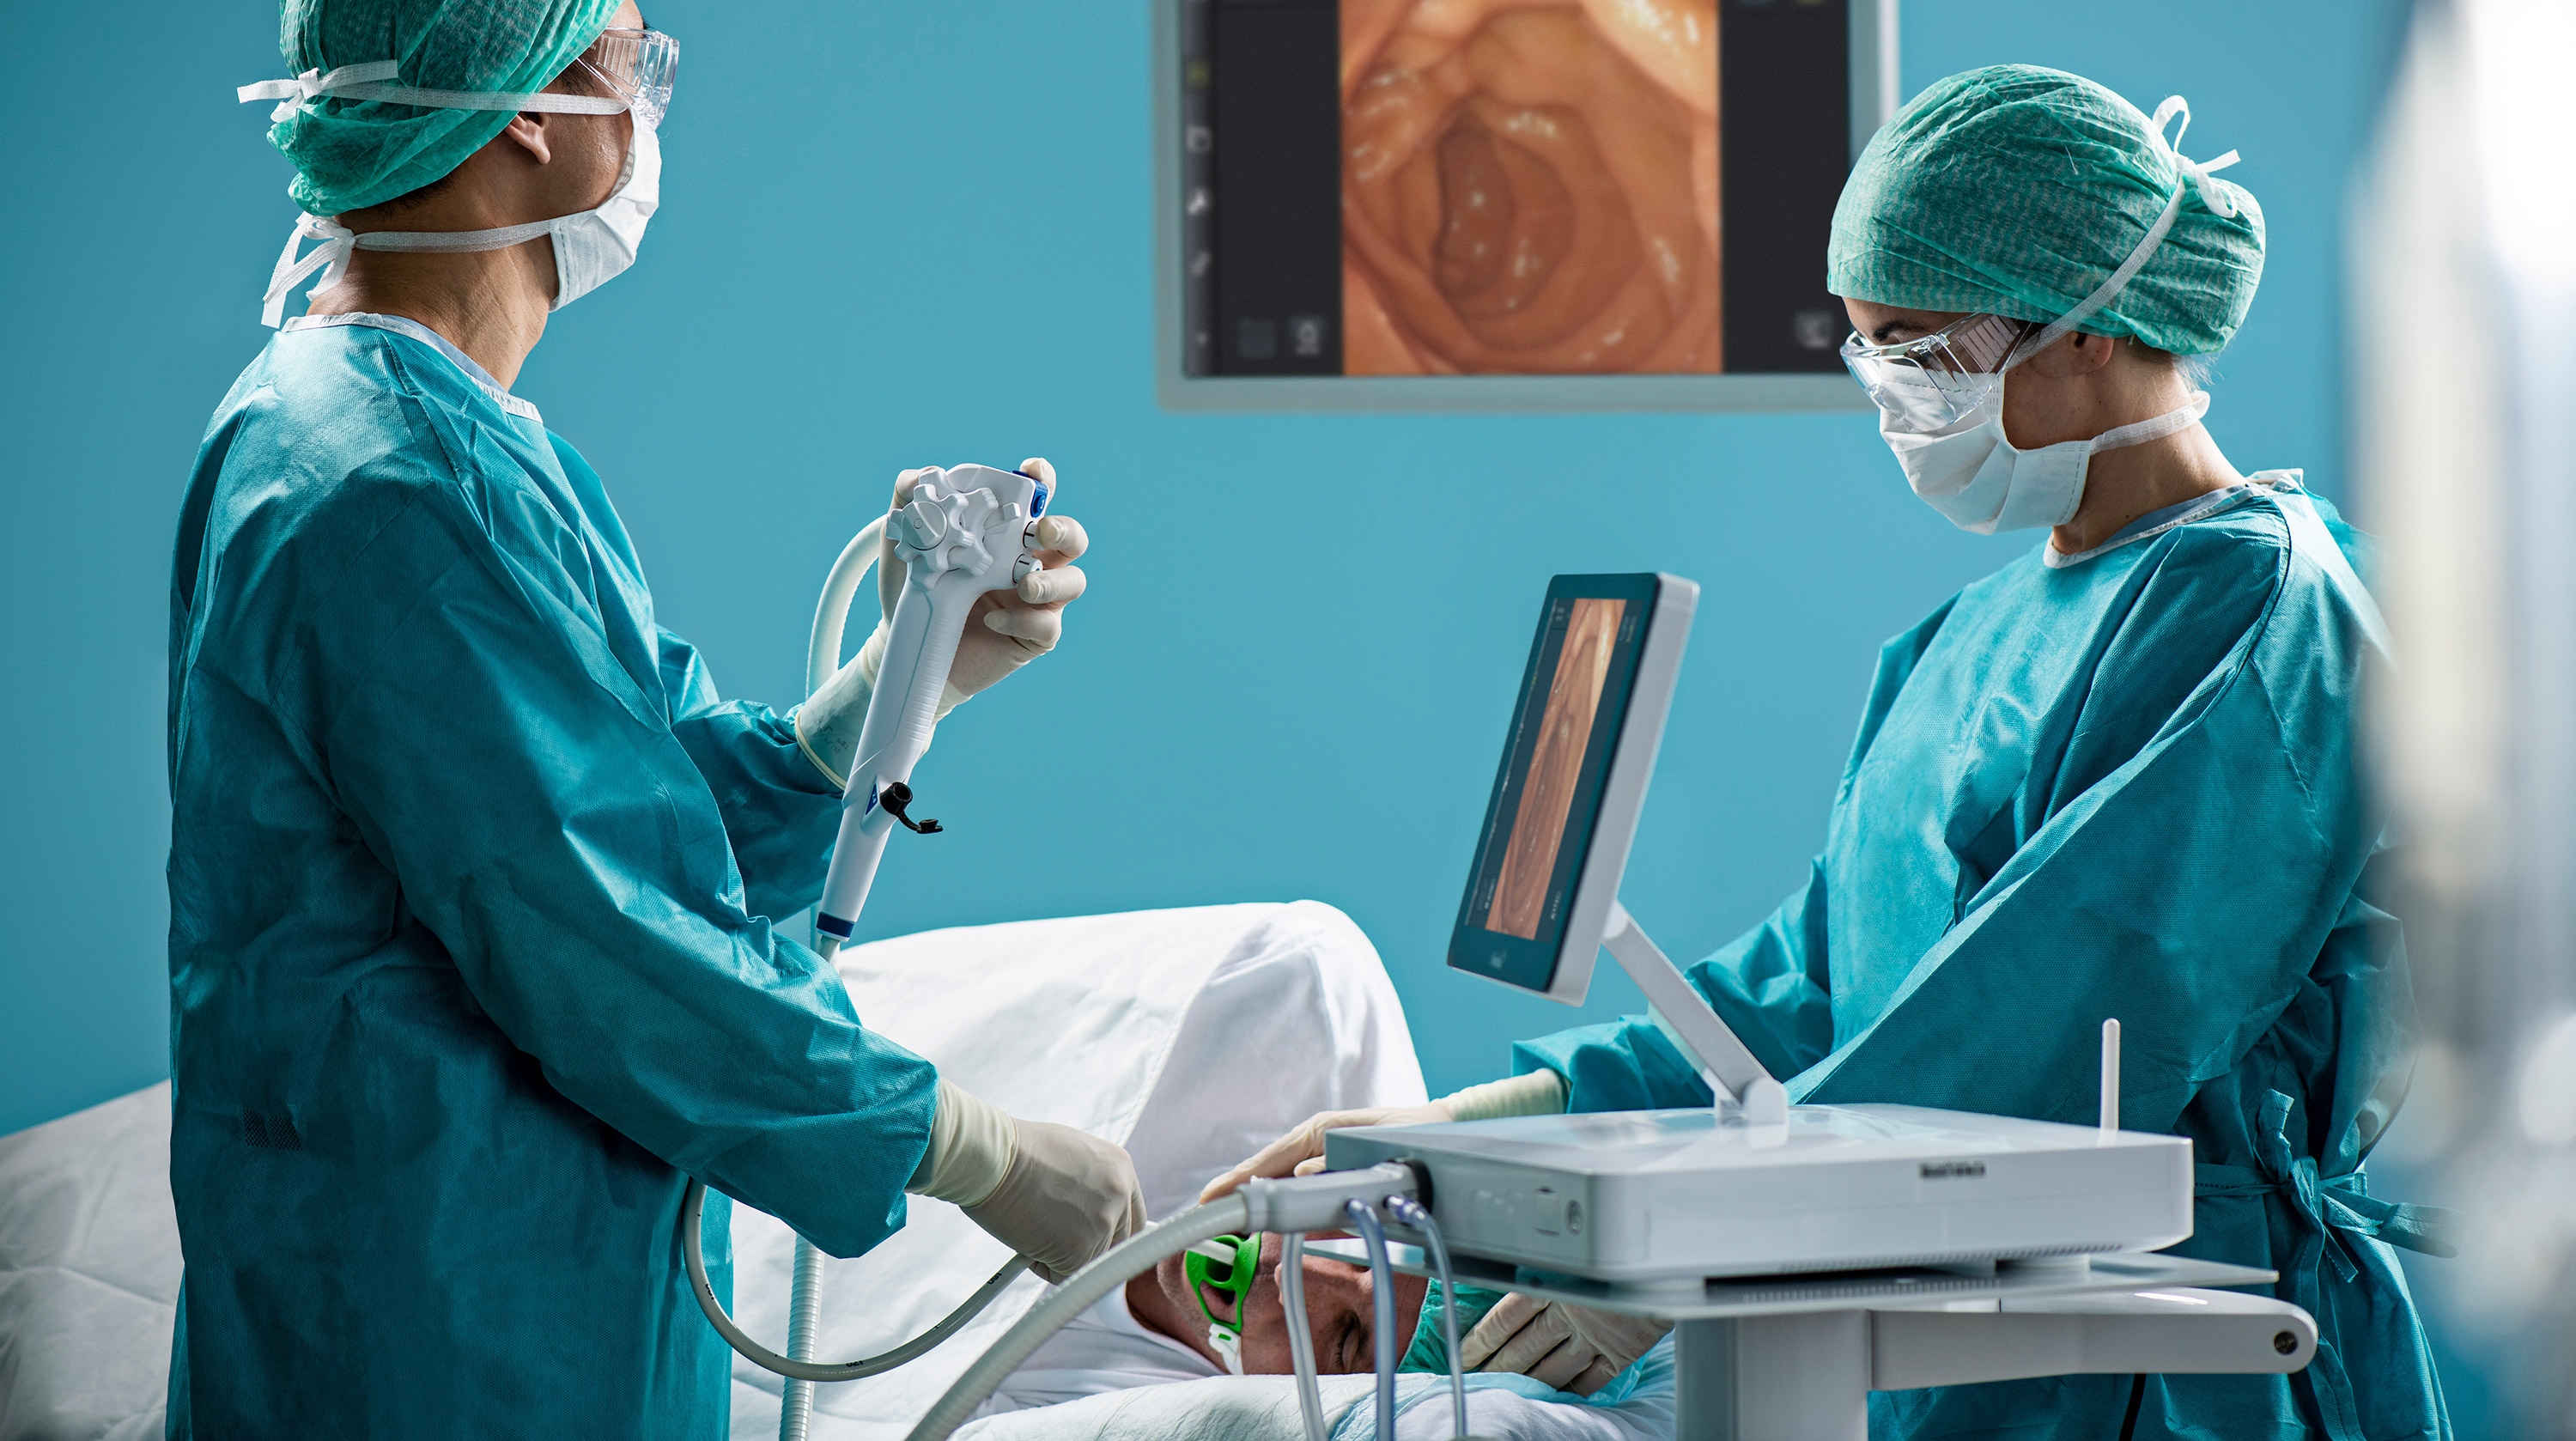 Study: Single-Use Gastroscopes Offer High Completion, Satisfaction Rates For EGD